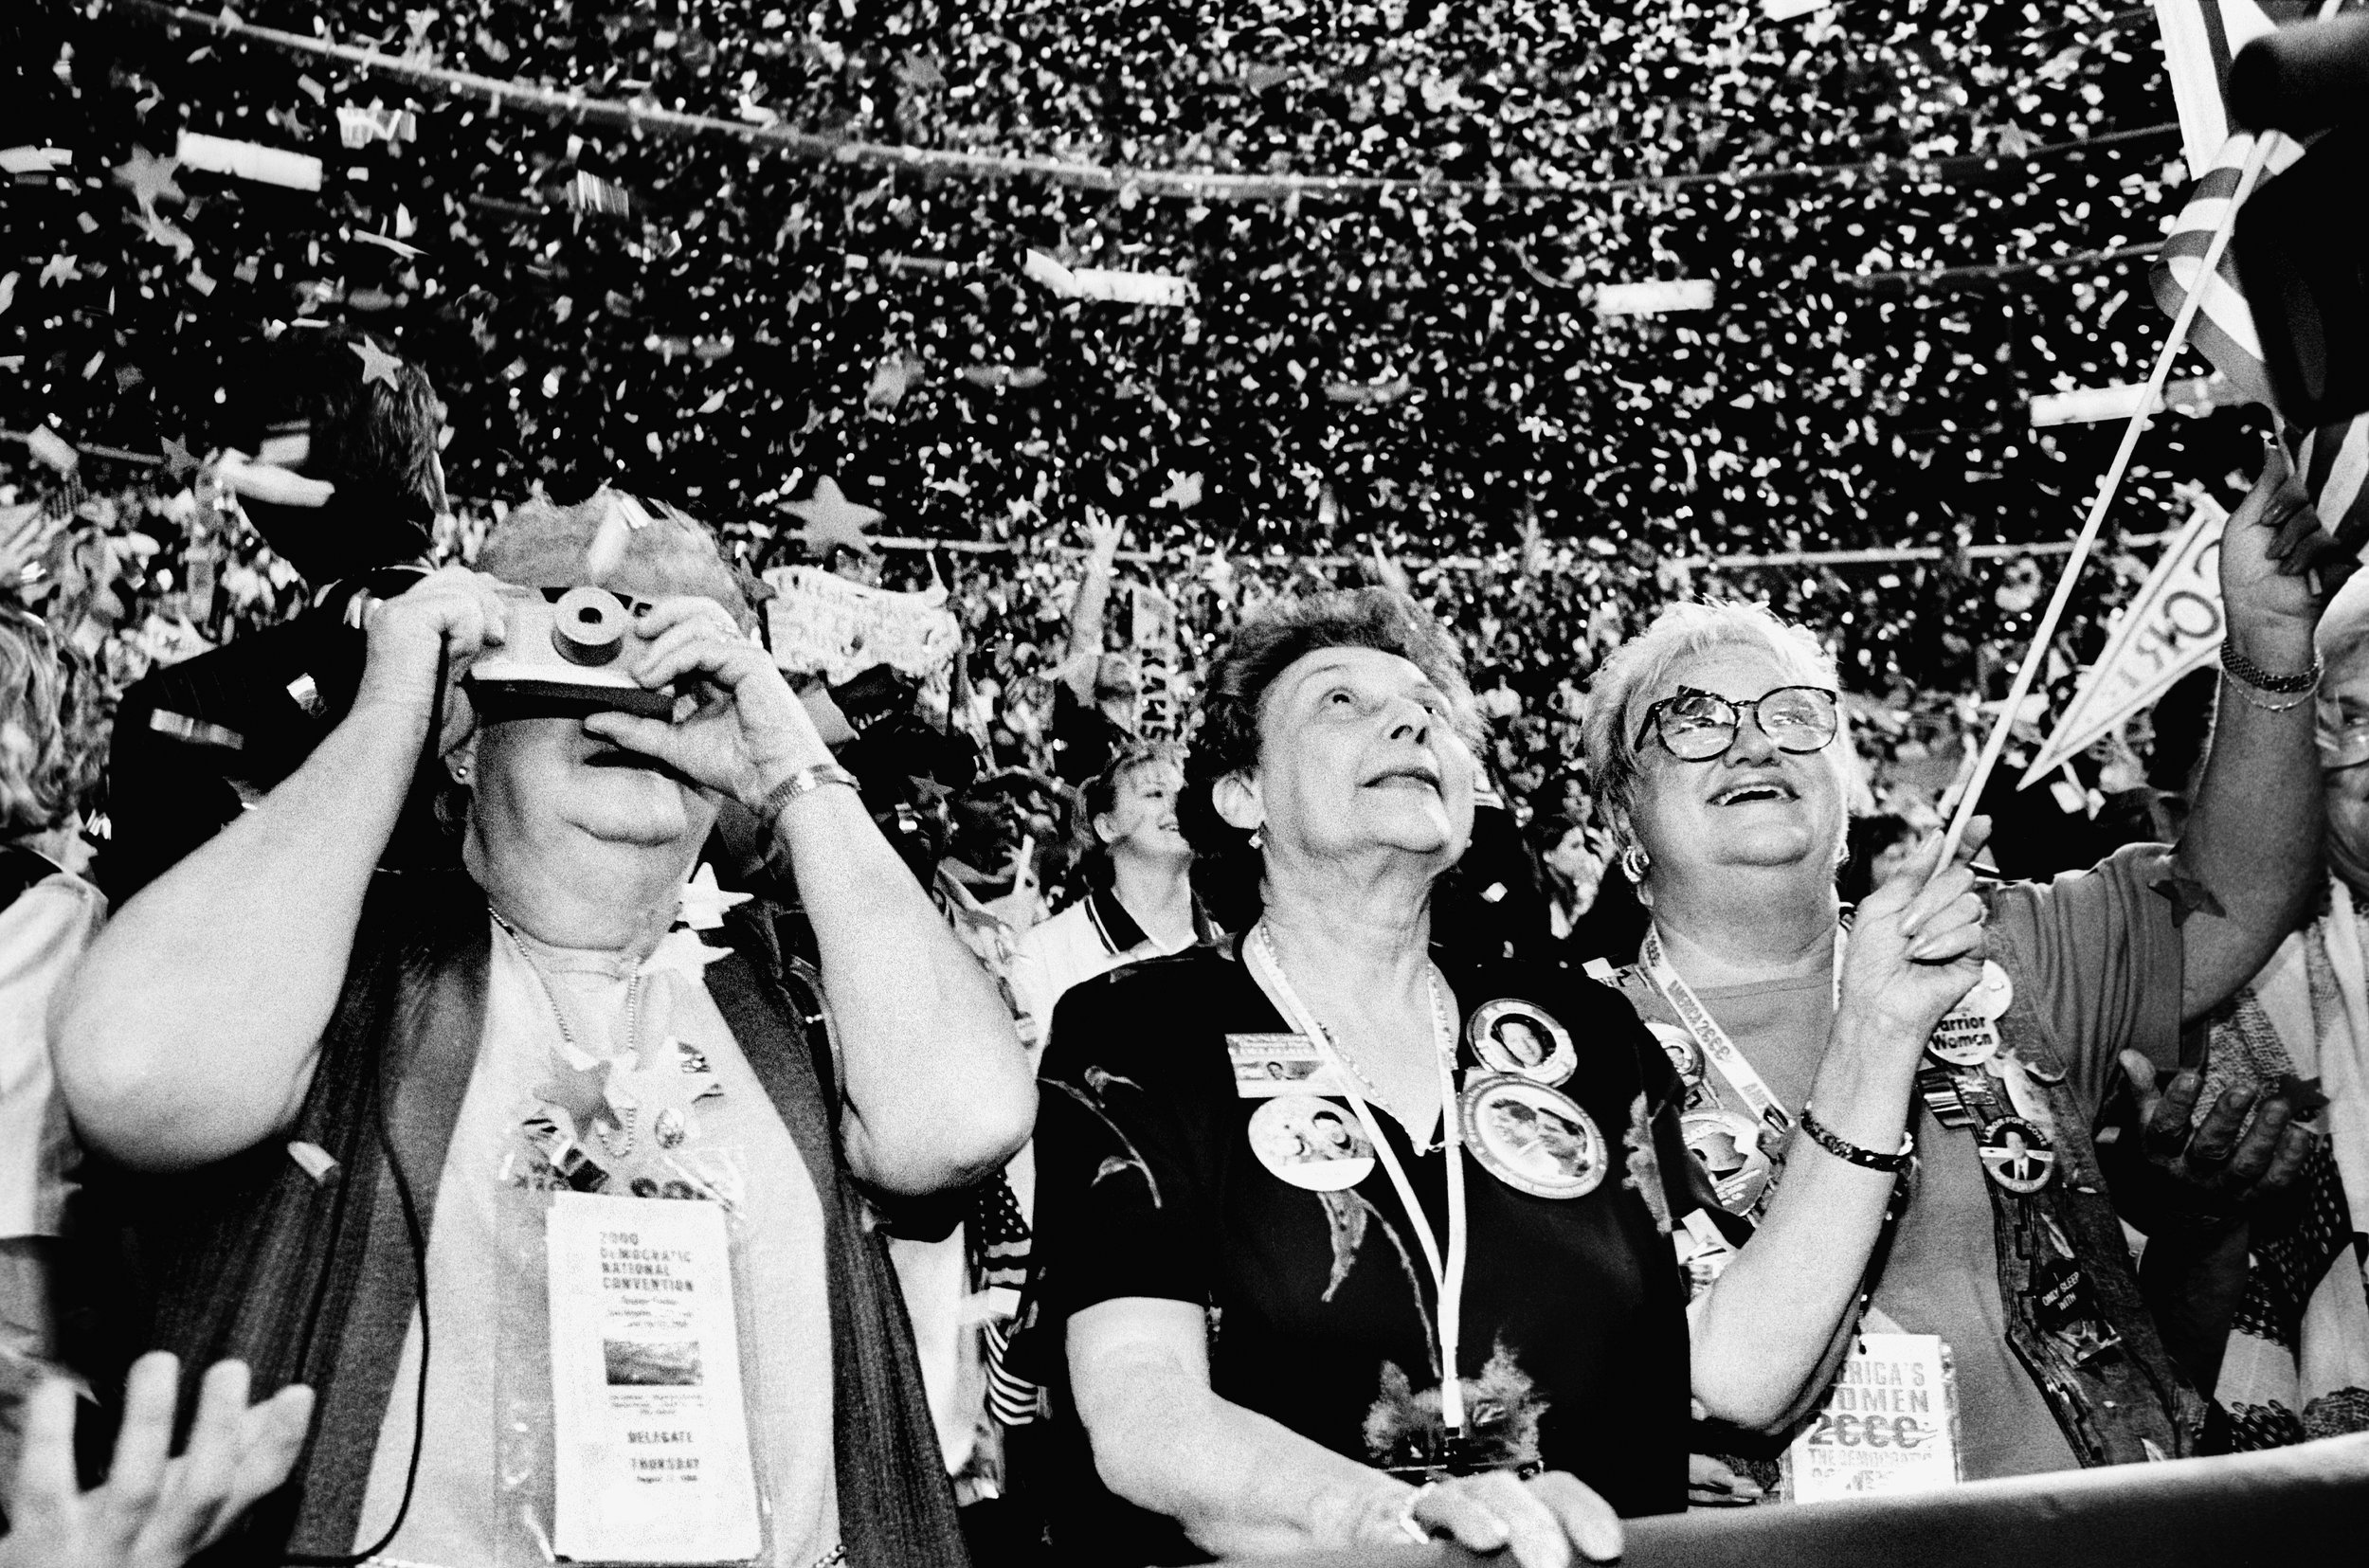  Delegates at the Democratic National Convention for US President in Los Angeles. 2000 